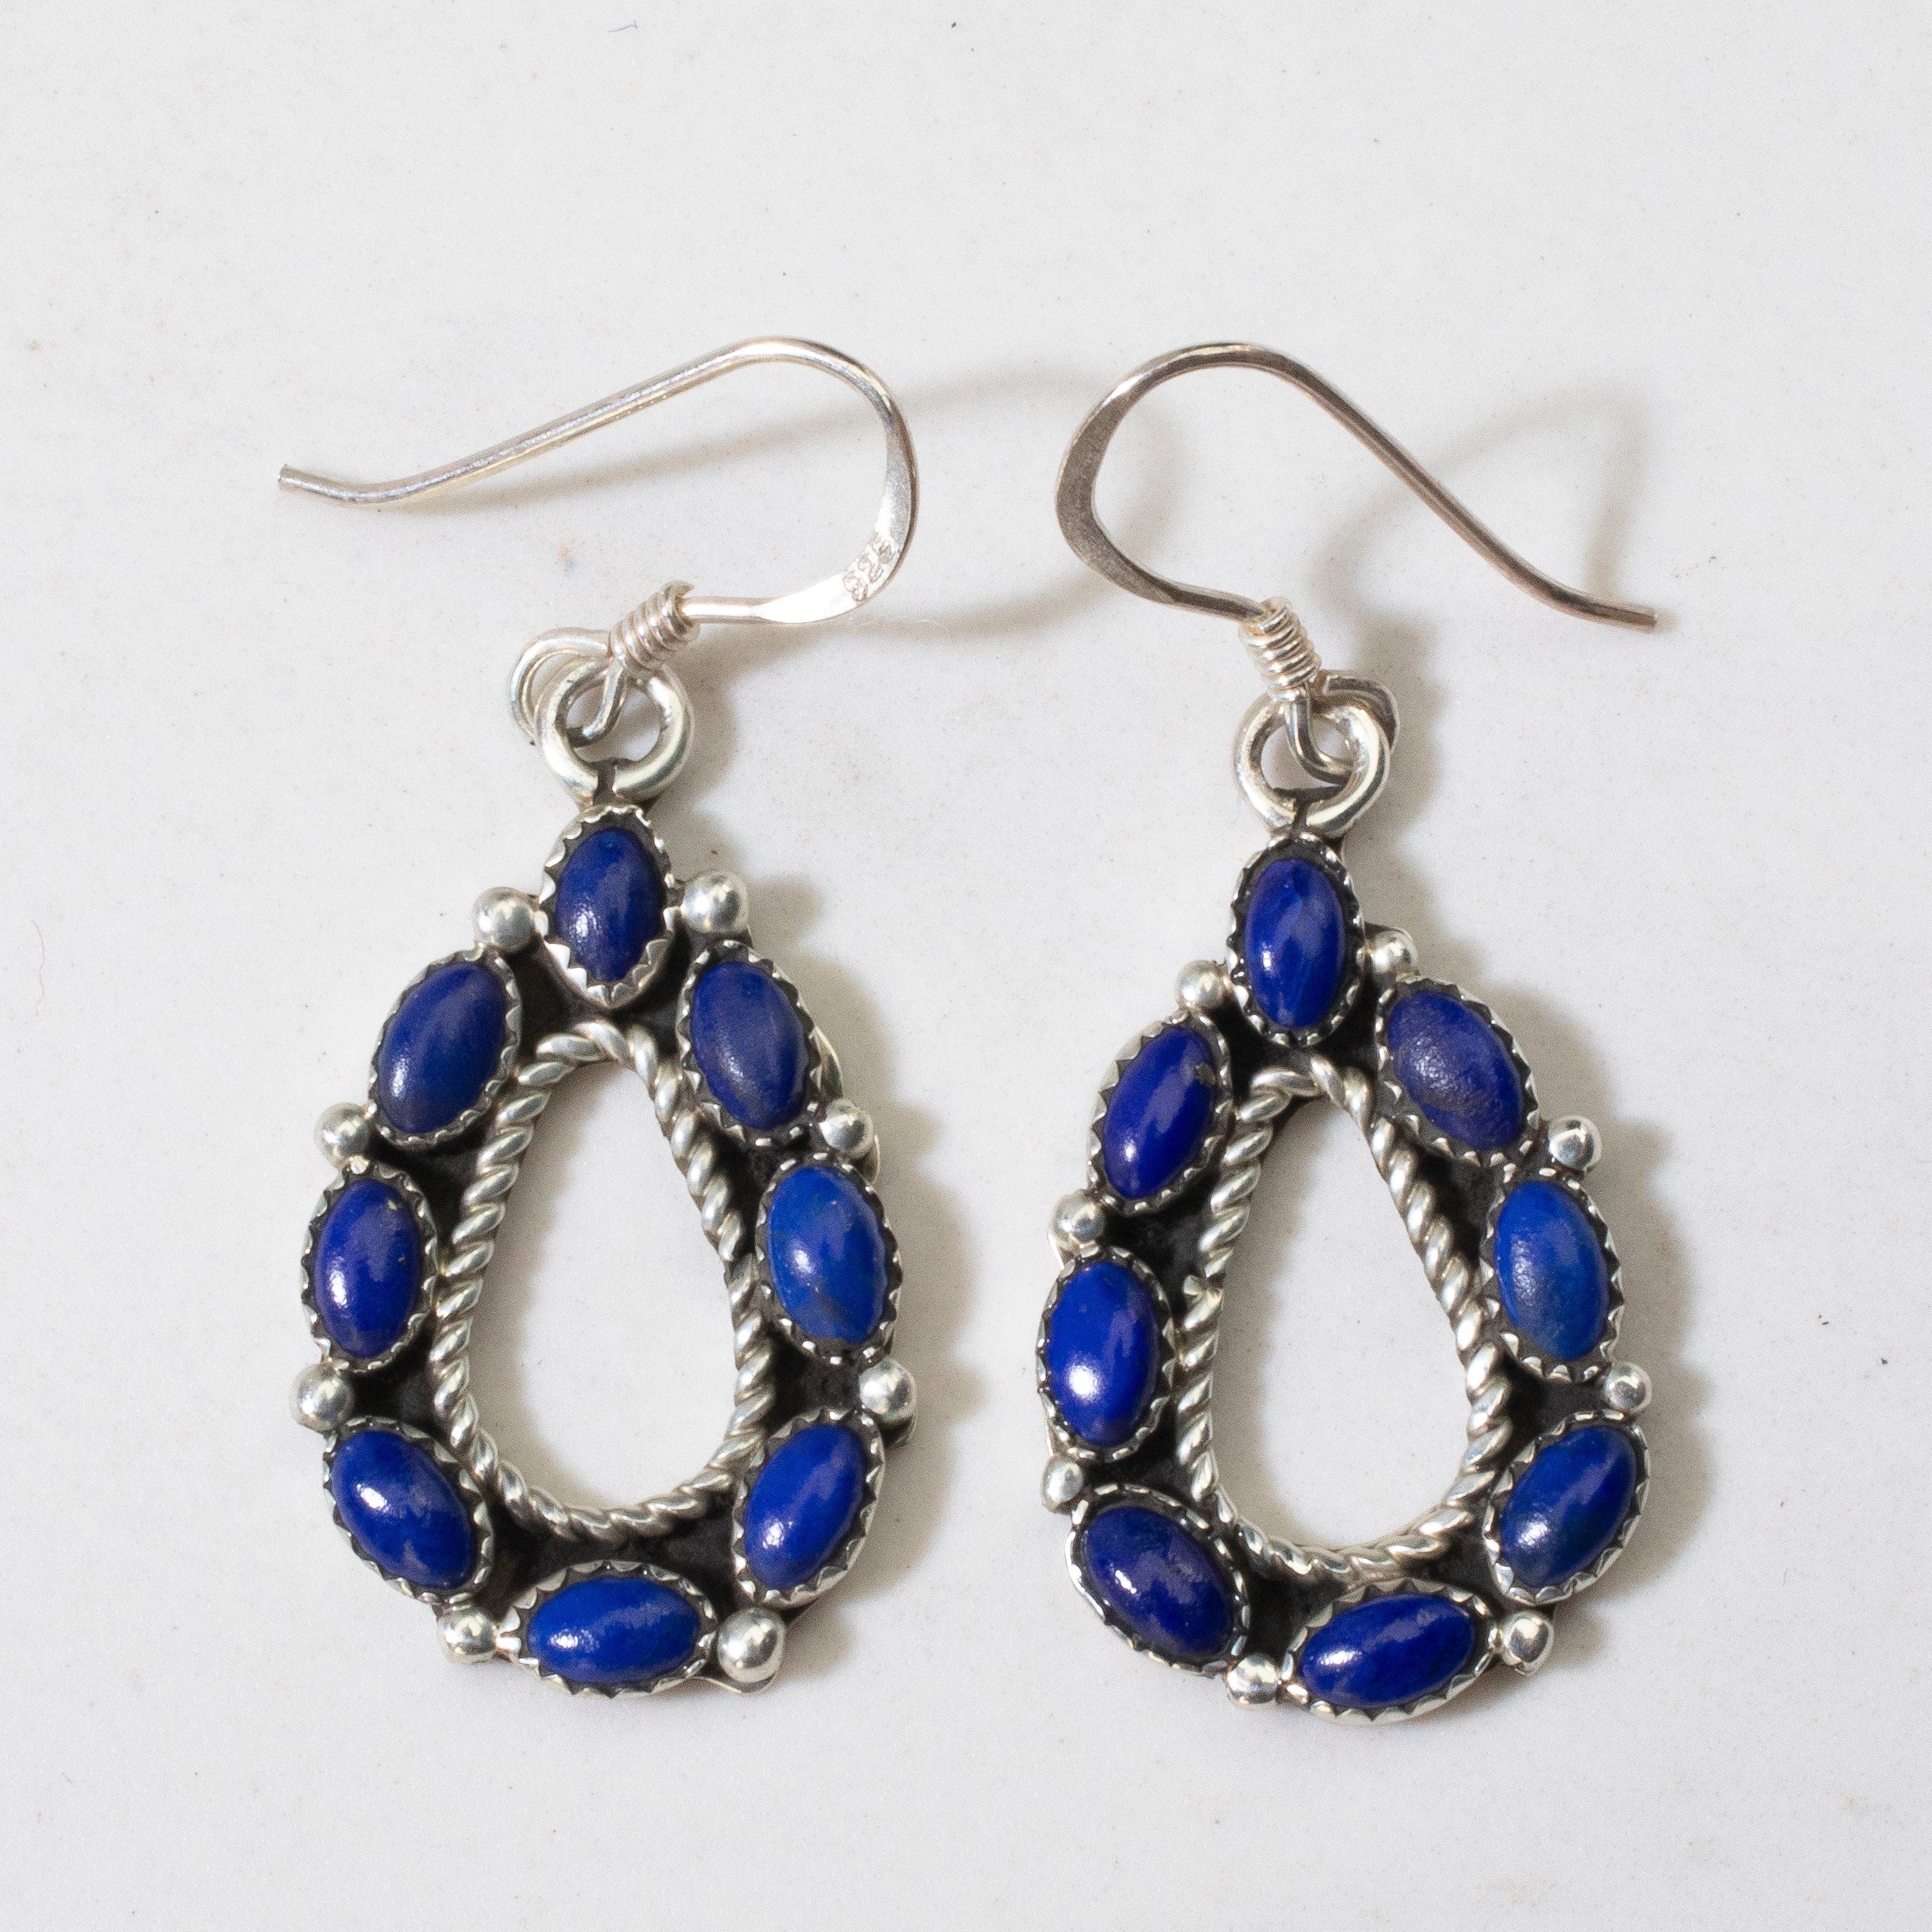 Kalifano Native American Jewelry Lapis Teardrop Navajo USA Native American Made 925 Sterling Silver Earrings with French Hook NAE300.034